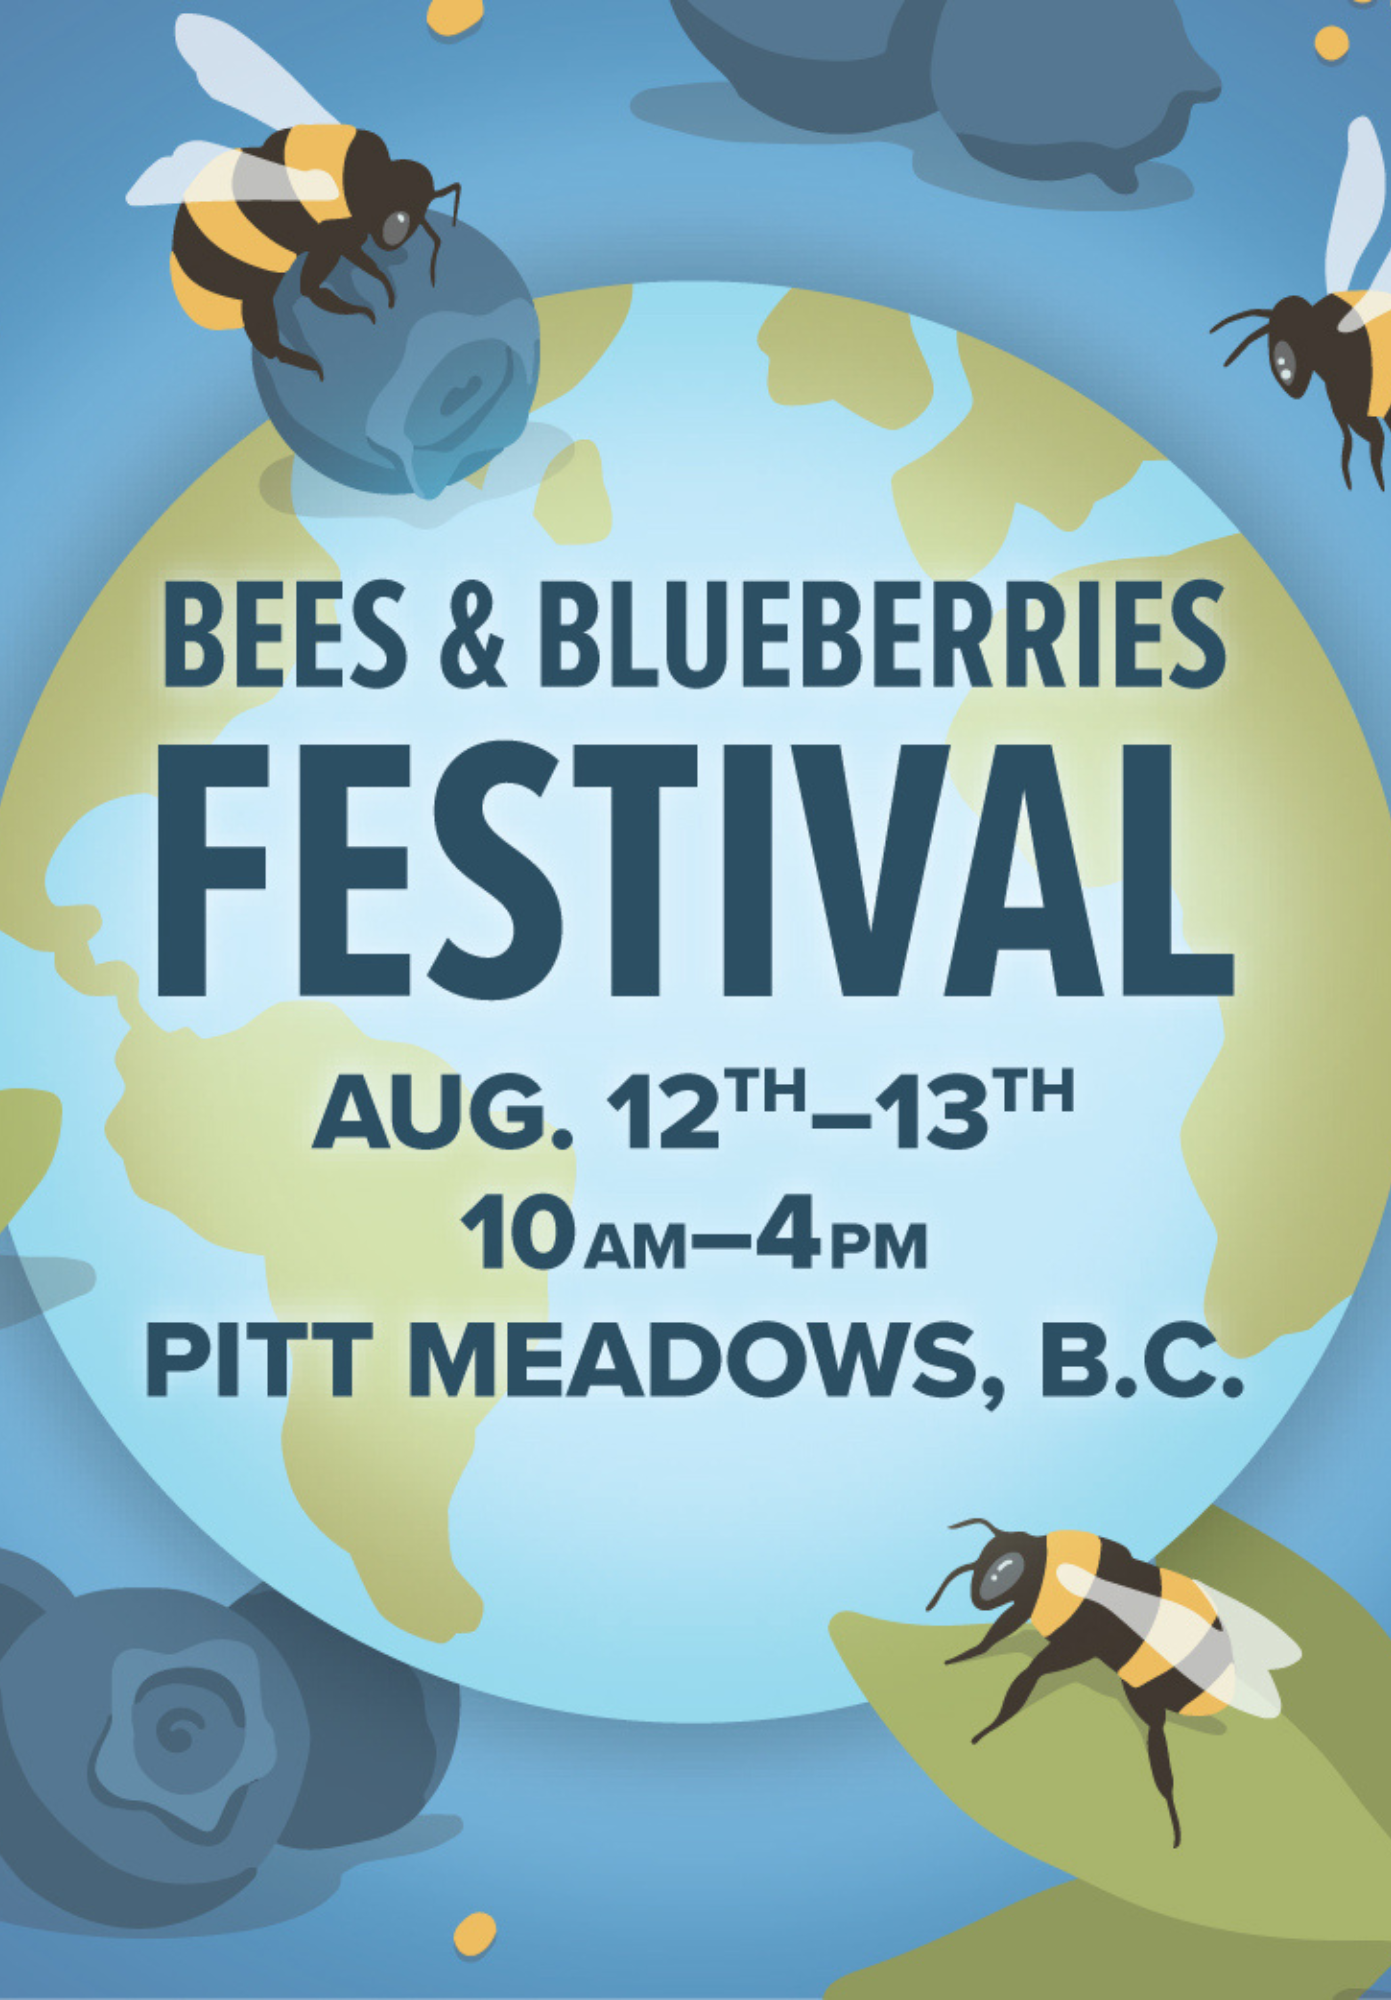 Dr. Bee Presents the 9th Annual Bees and Blueberries Festival: A Sweet Celebration of Nature and Community